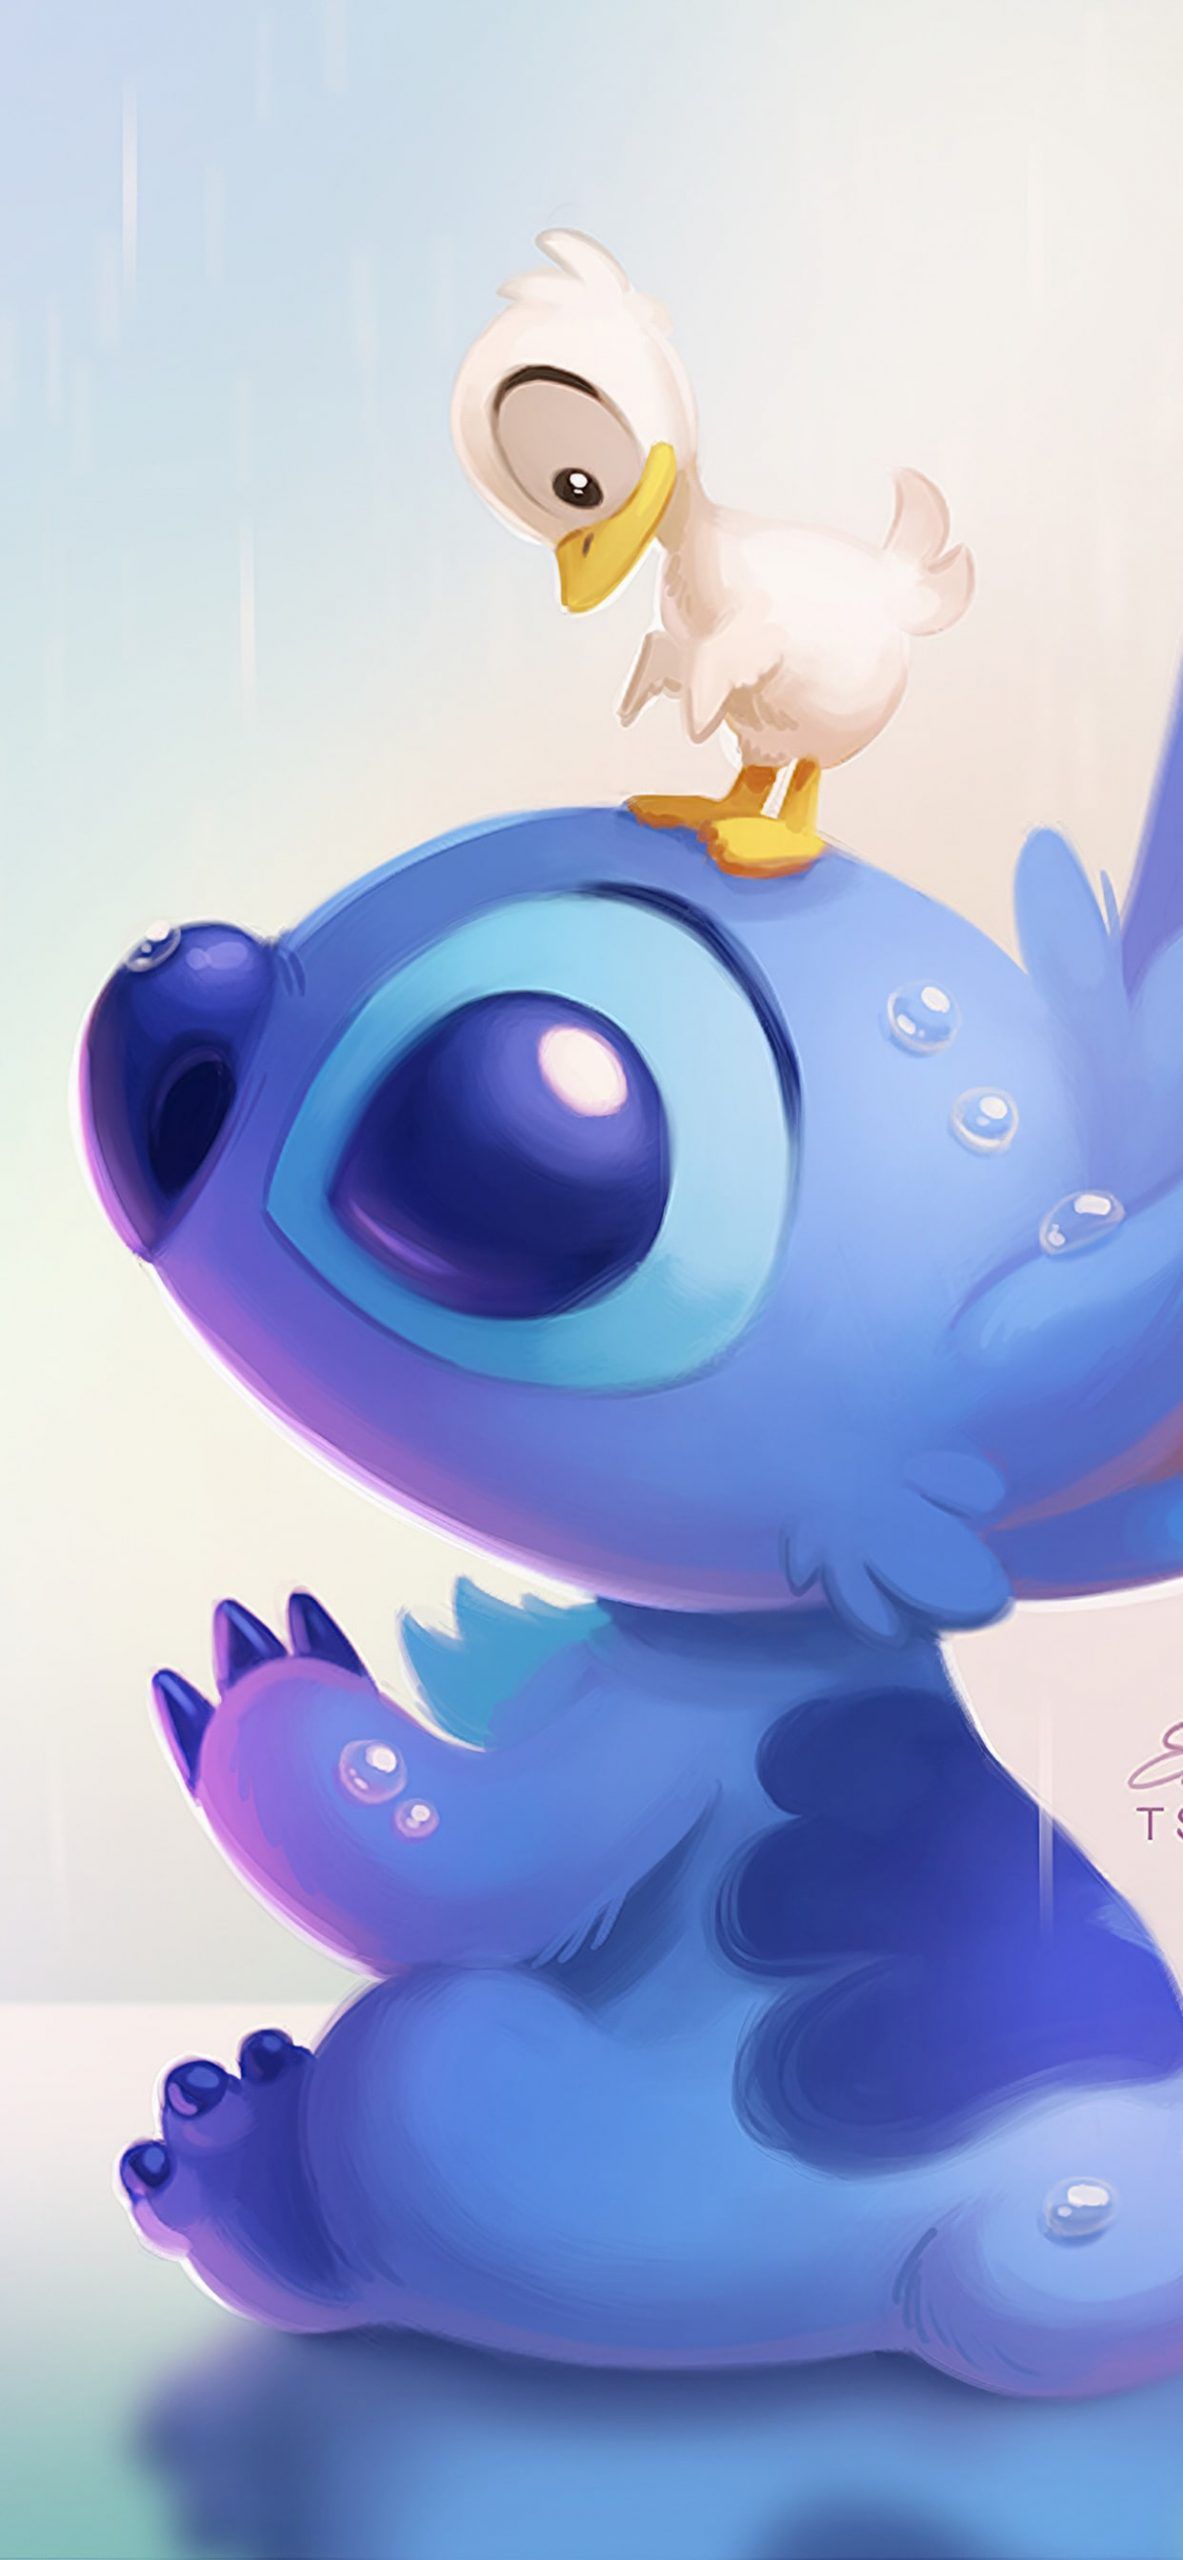 Stitch wallpaper for your phone stitch wallpaper for your phone - Stitch